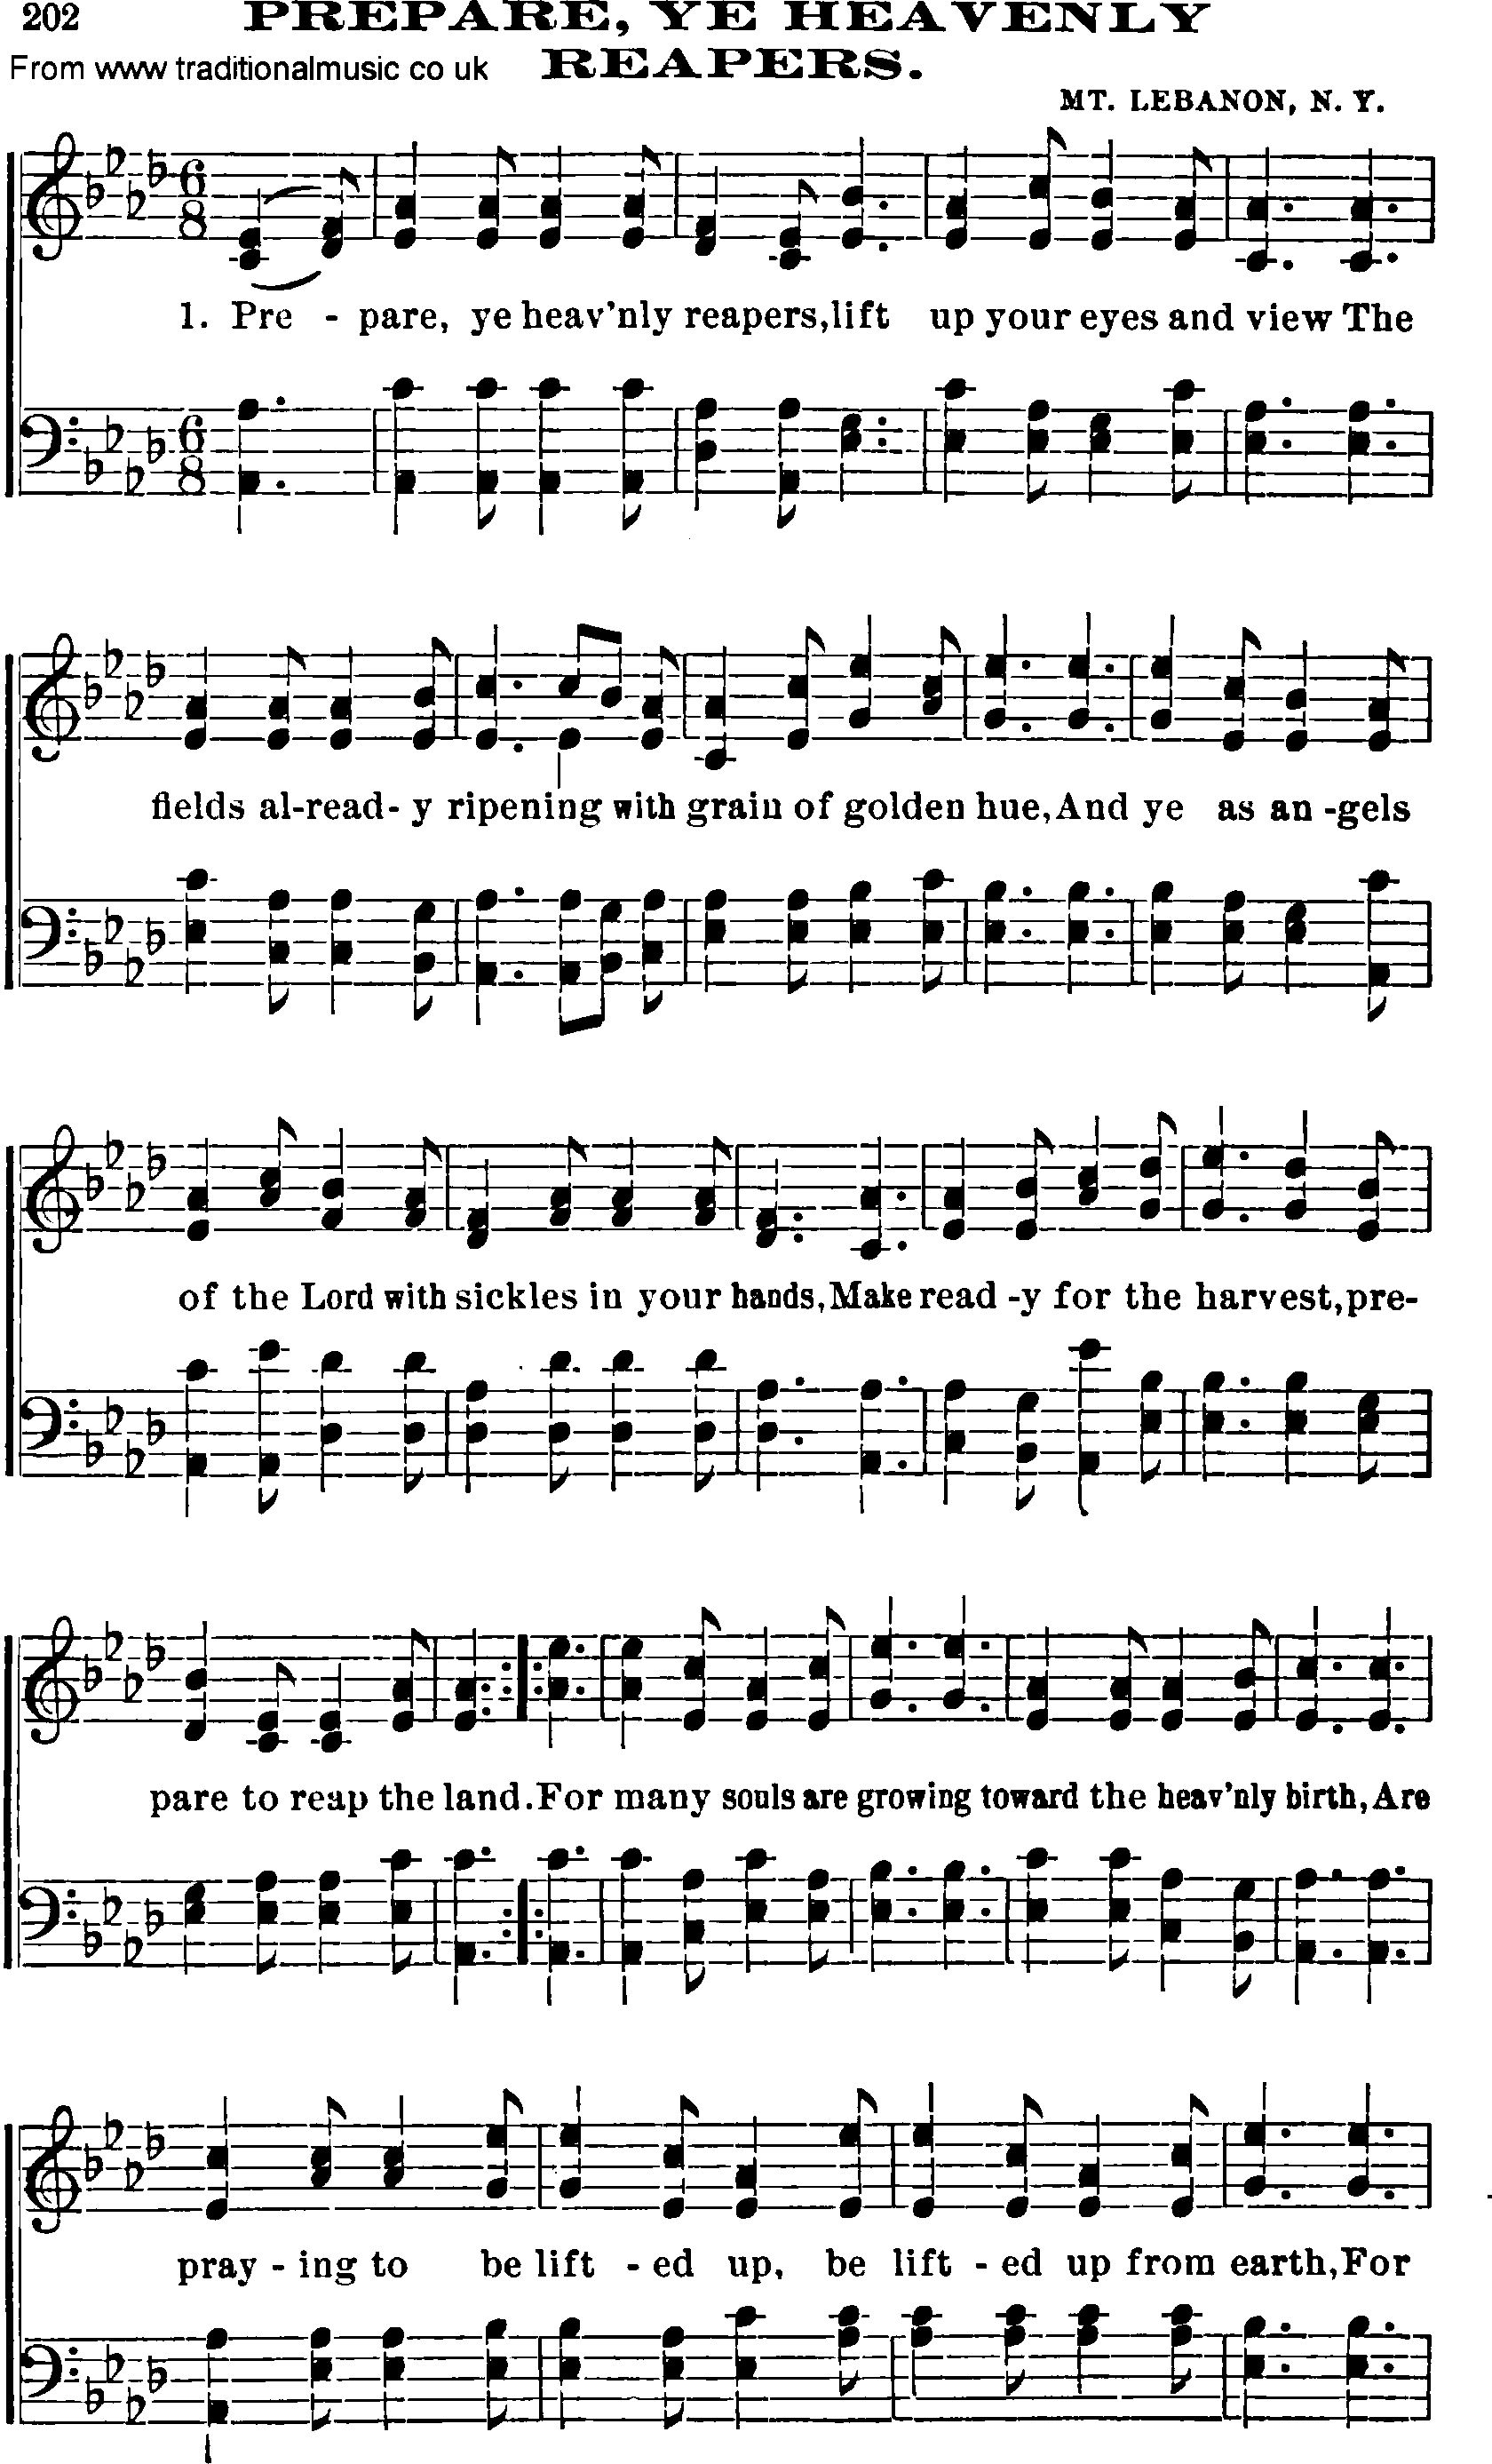 Shaker Music collection, Hymn: prepare, ye heavenly reapers, sheetmusic and PDF